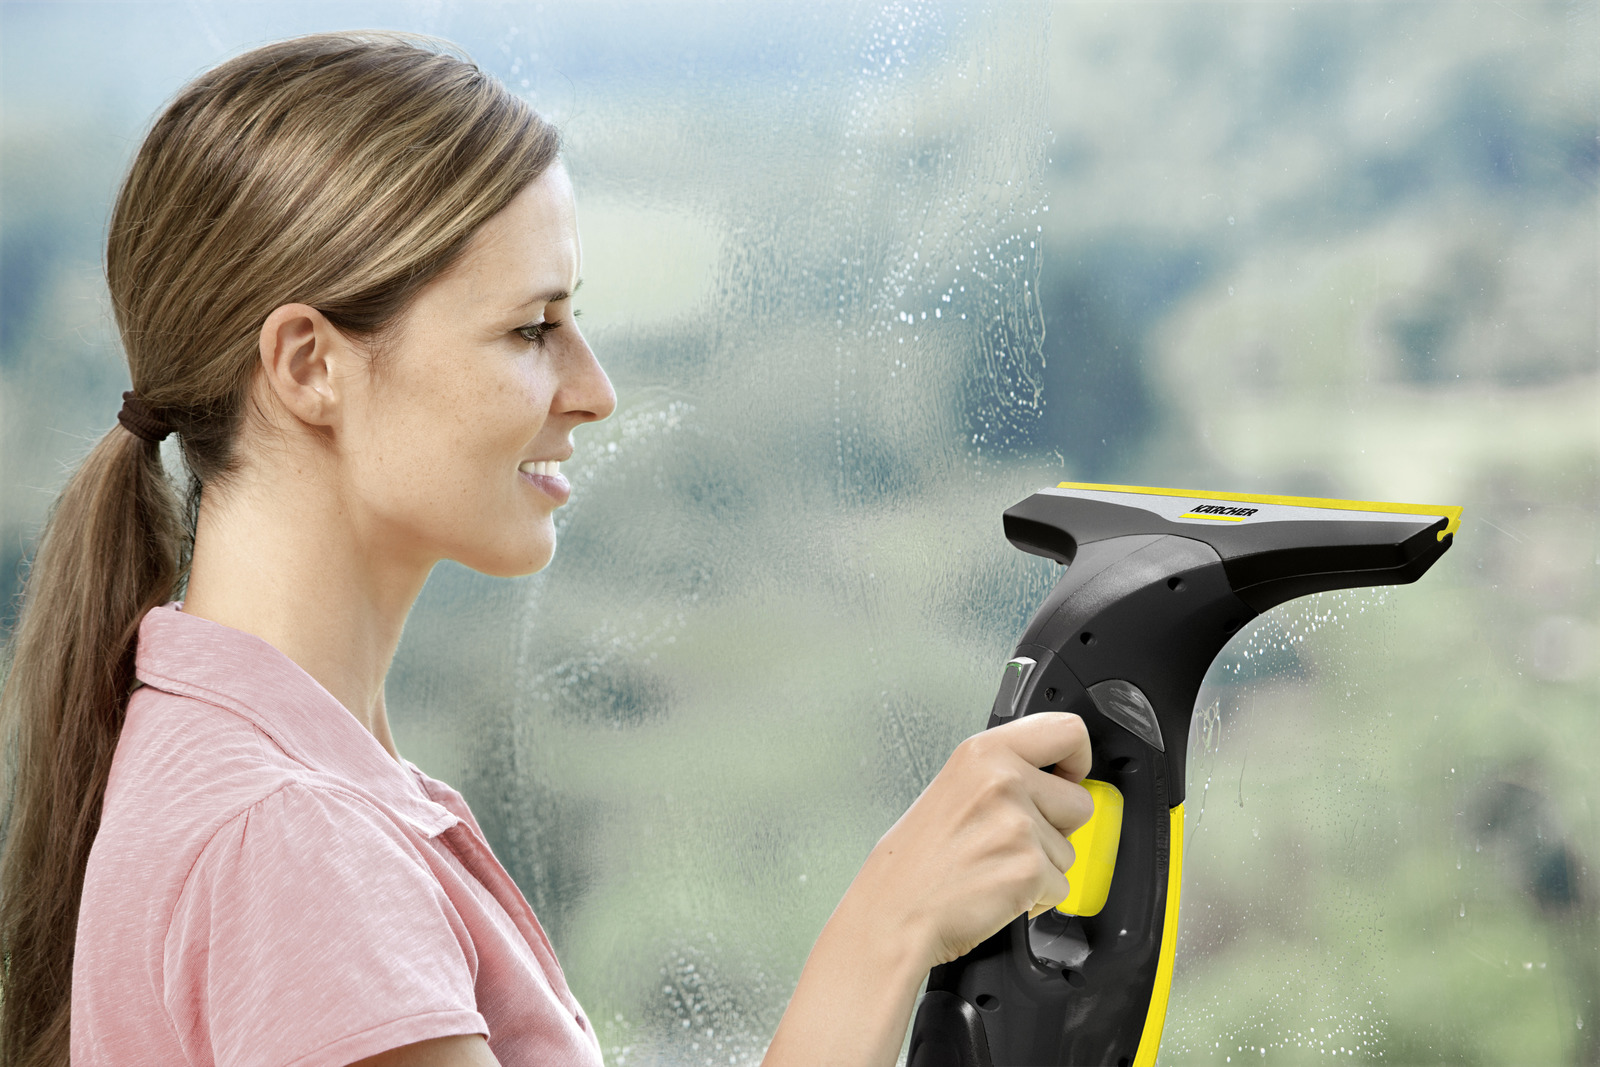 Karcher WV6 window vacuum: Is it a cleaning must-buy? Review